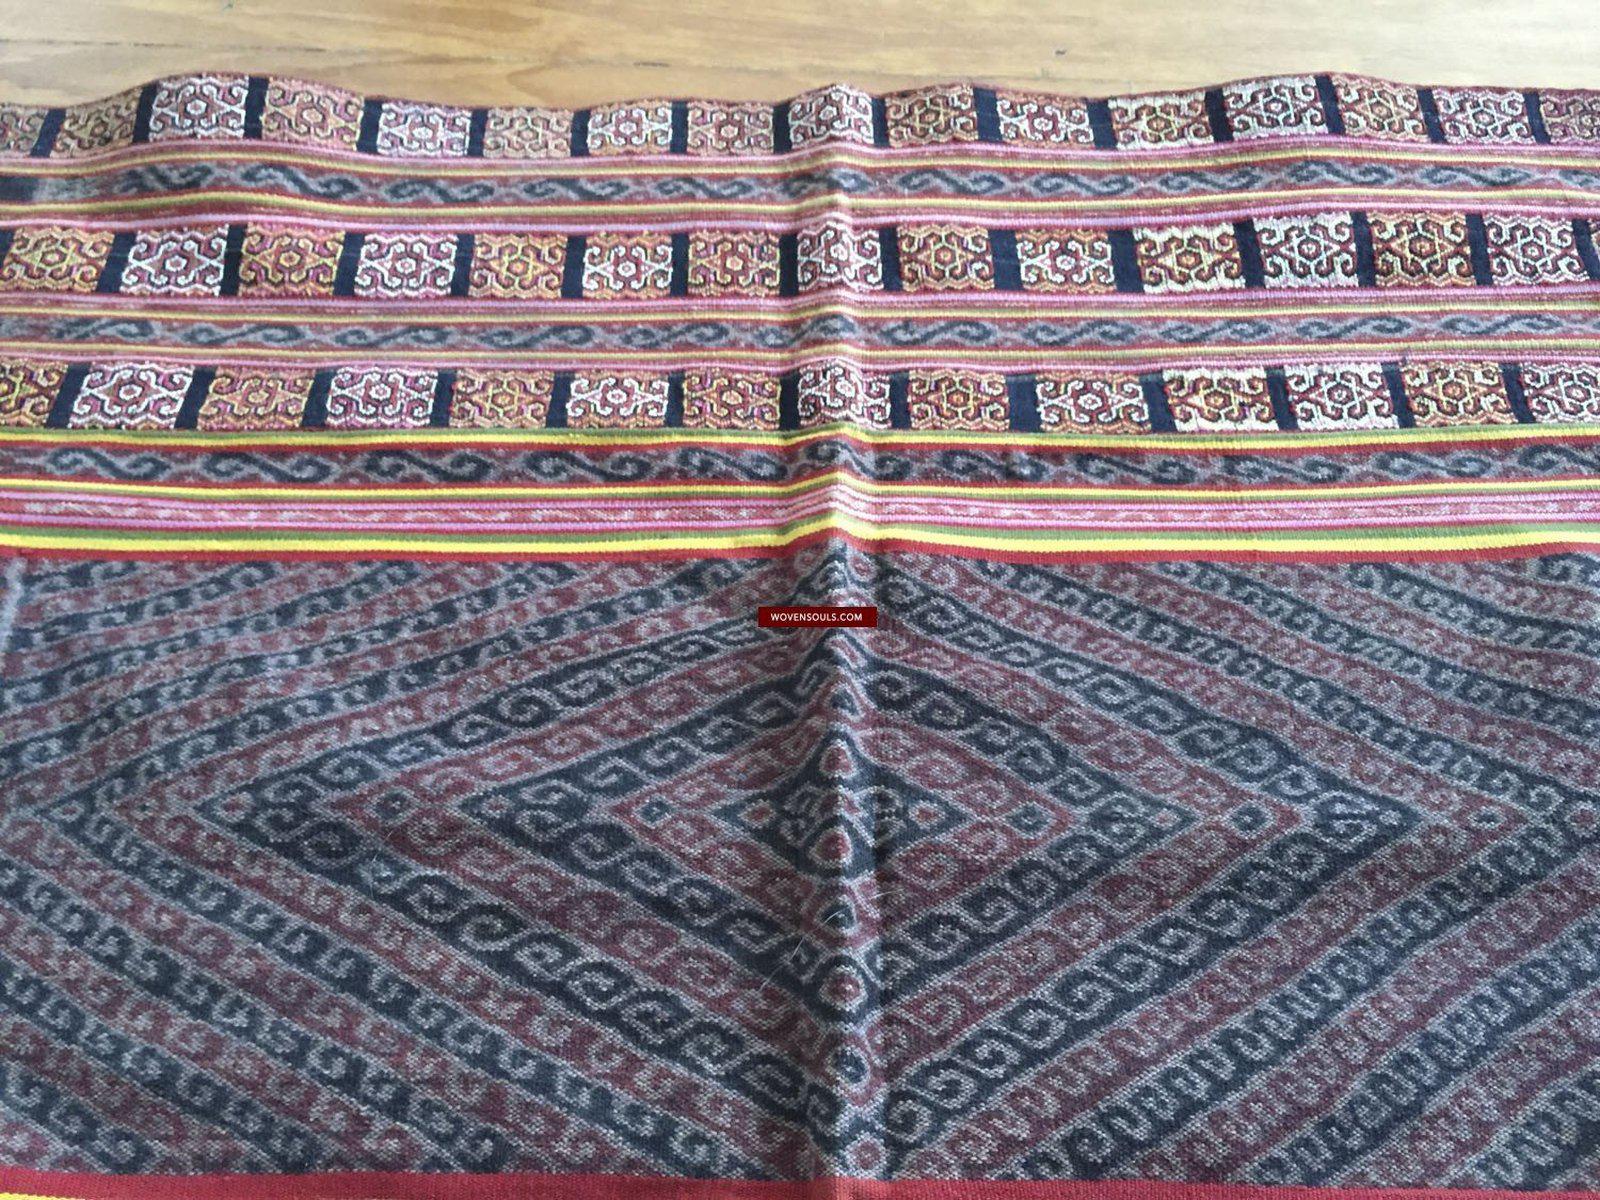 902 Old Ikat Sarong Weaving with Supplementary Weft from Biboki Timor ...